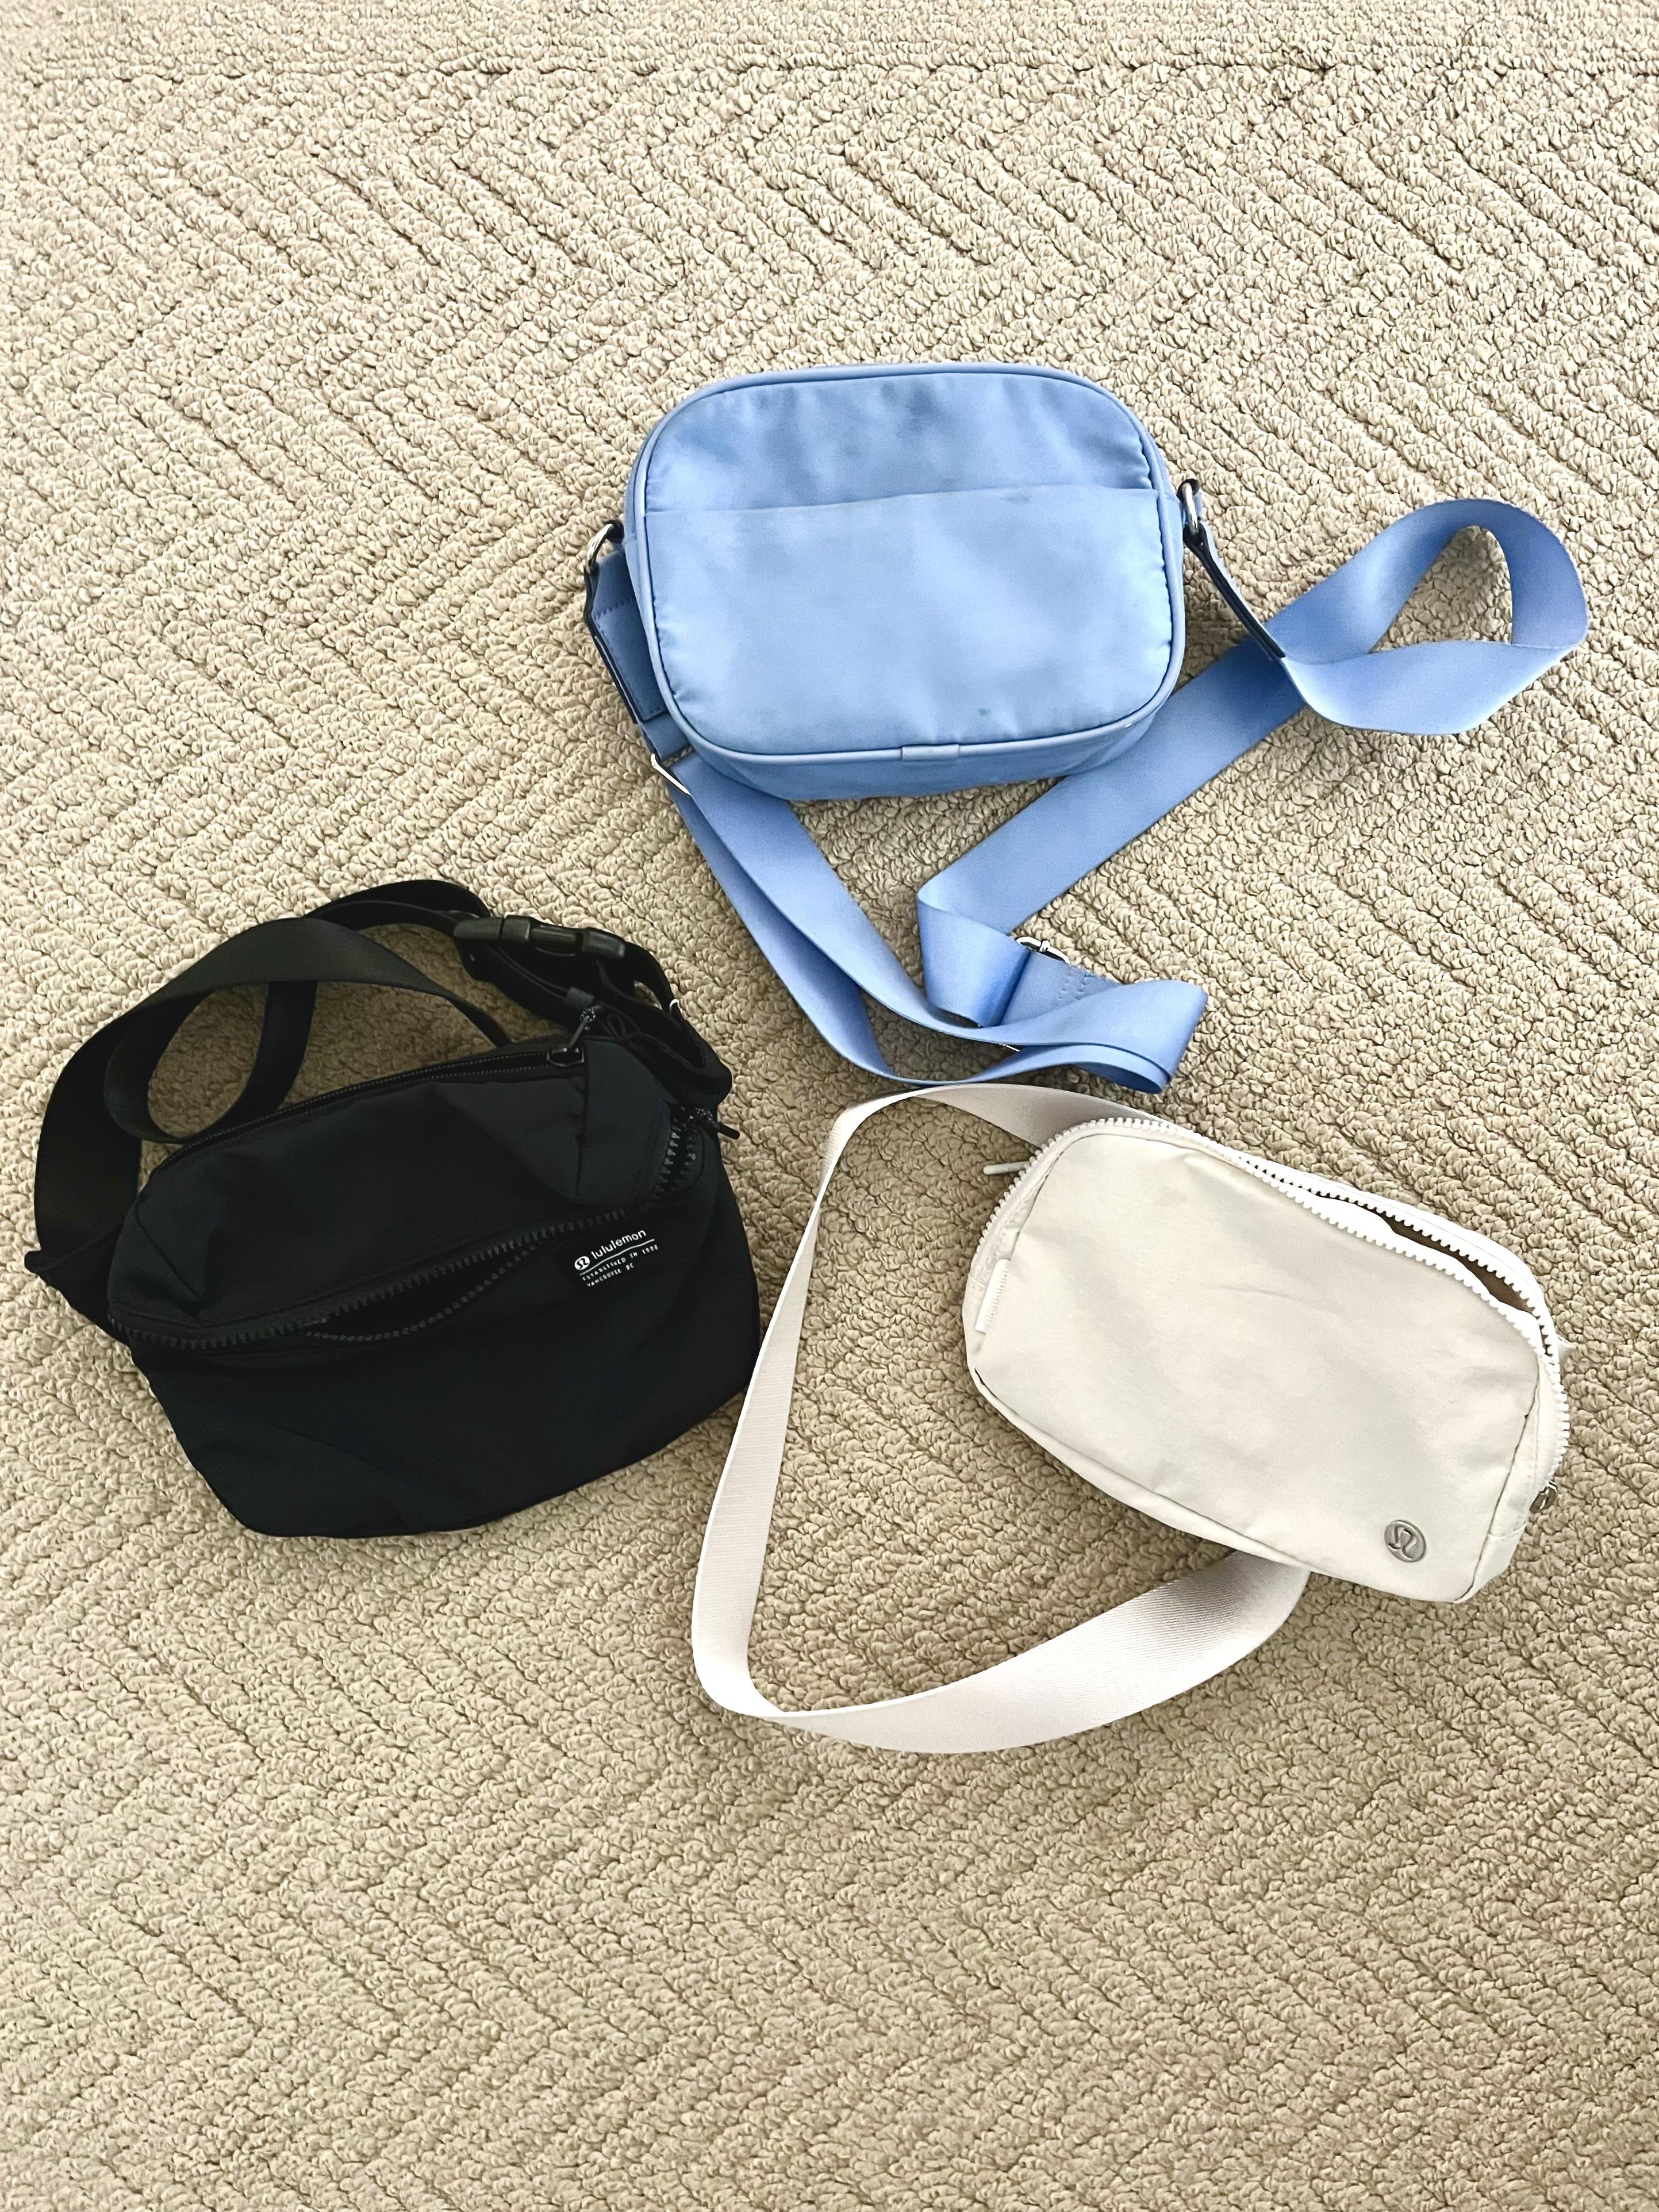 This $15 Bag At Target Is A Dupe For the Lululemon Everywhere Belt Bag –  SheKnows